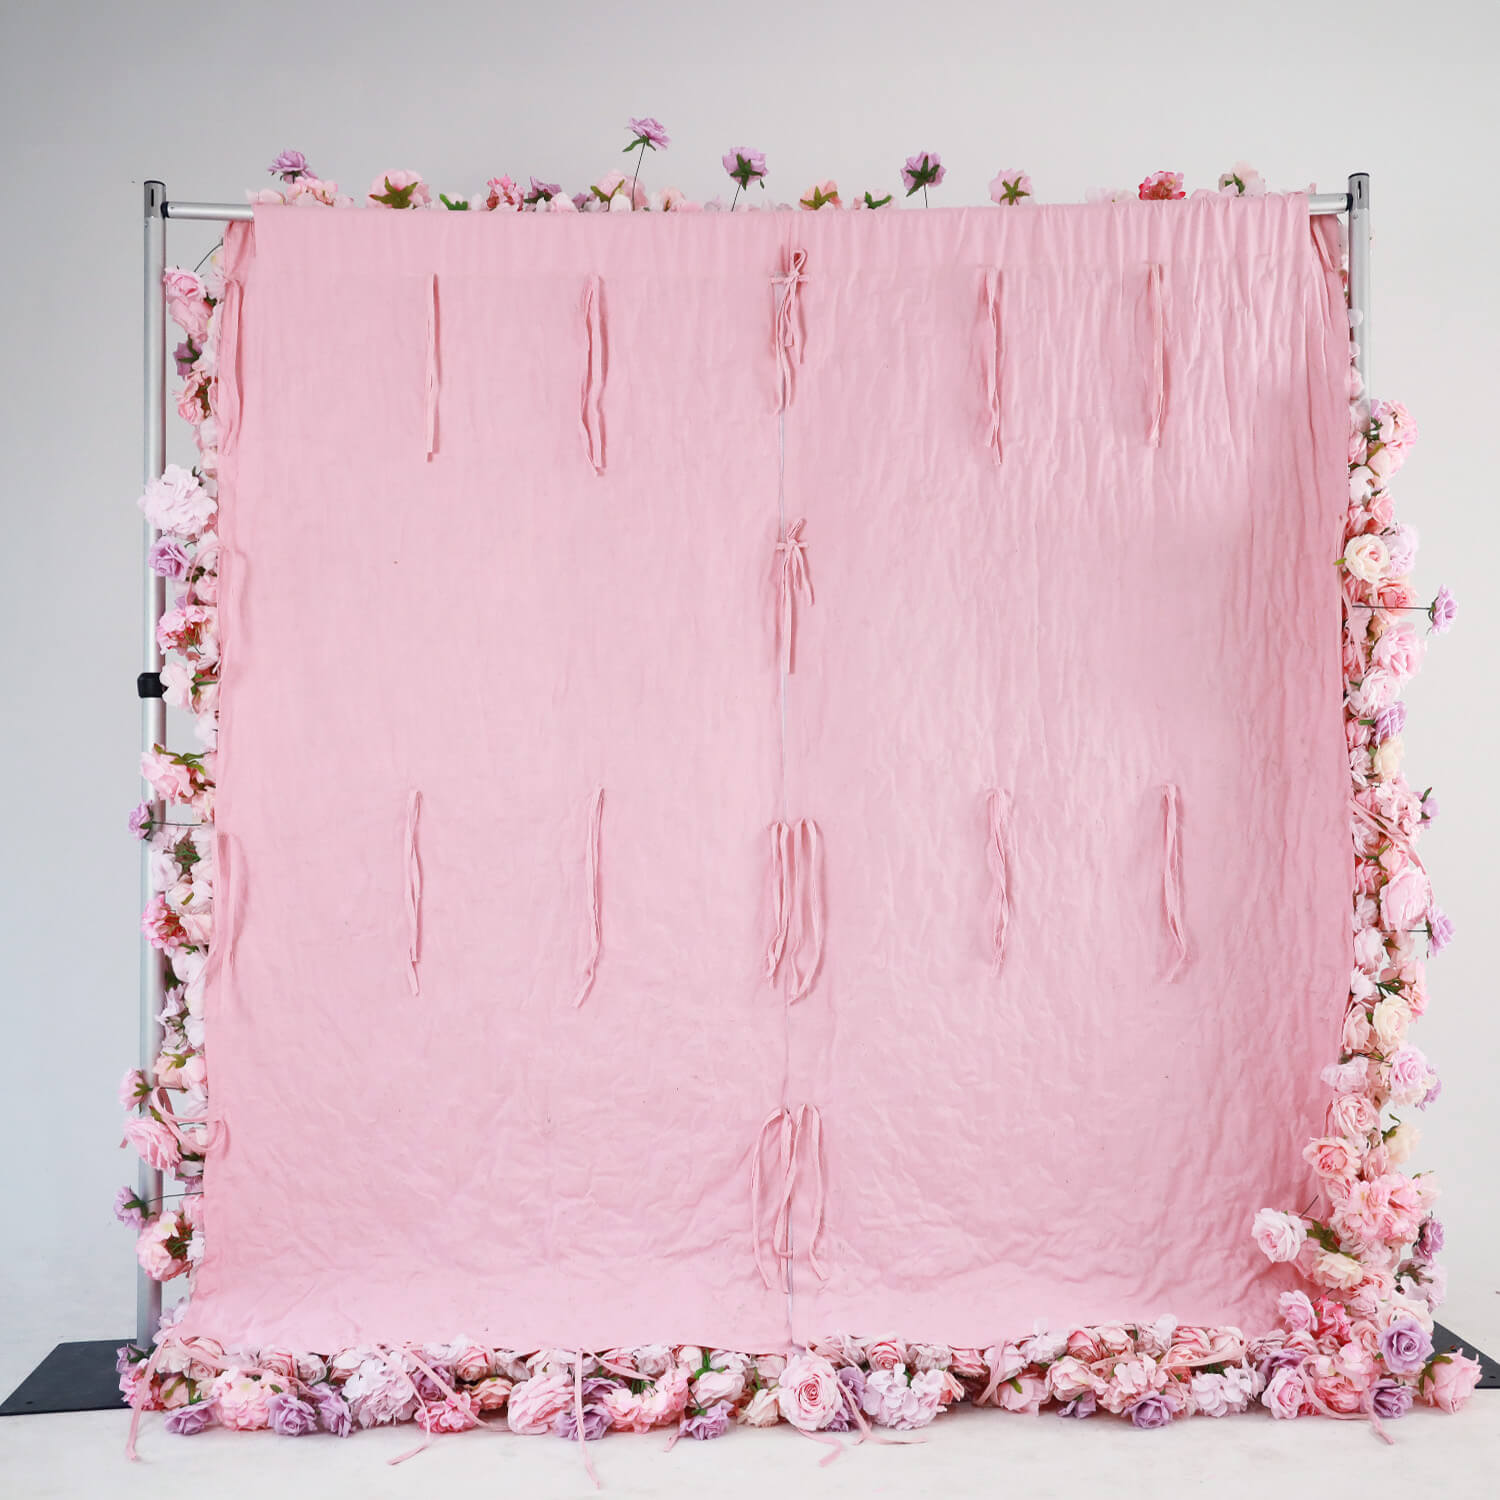 Pink and purple roses fabric flower wall is easy to install.